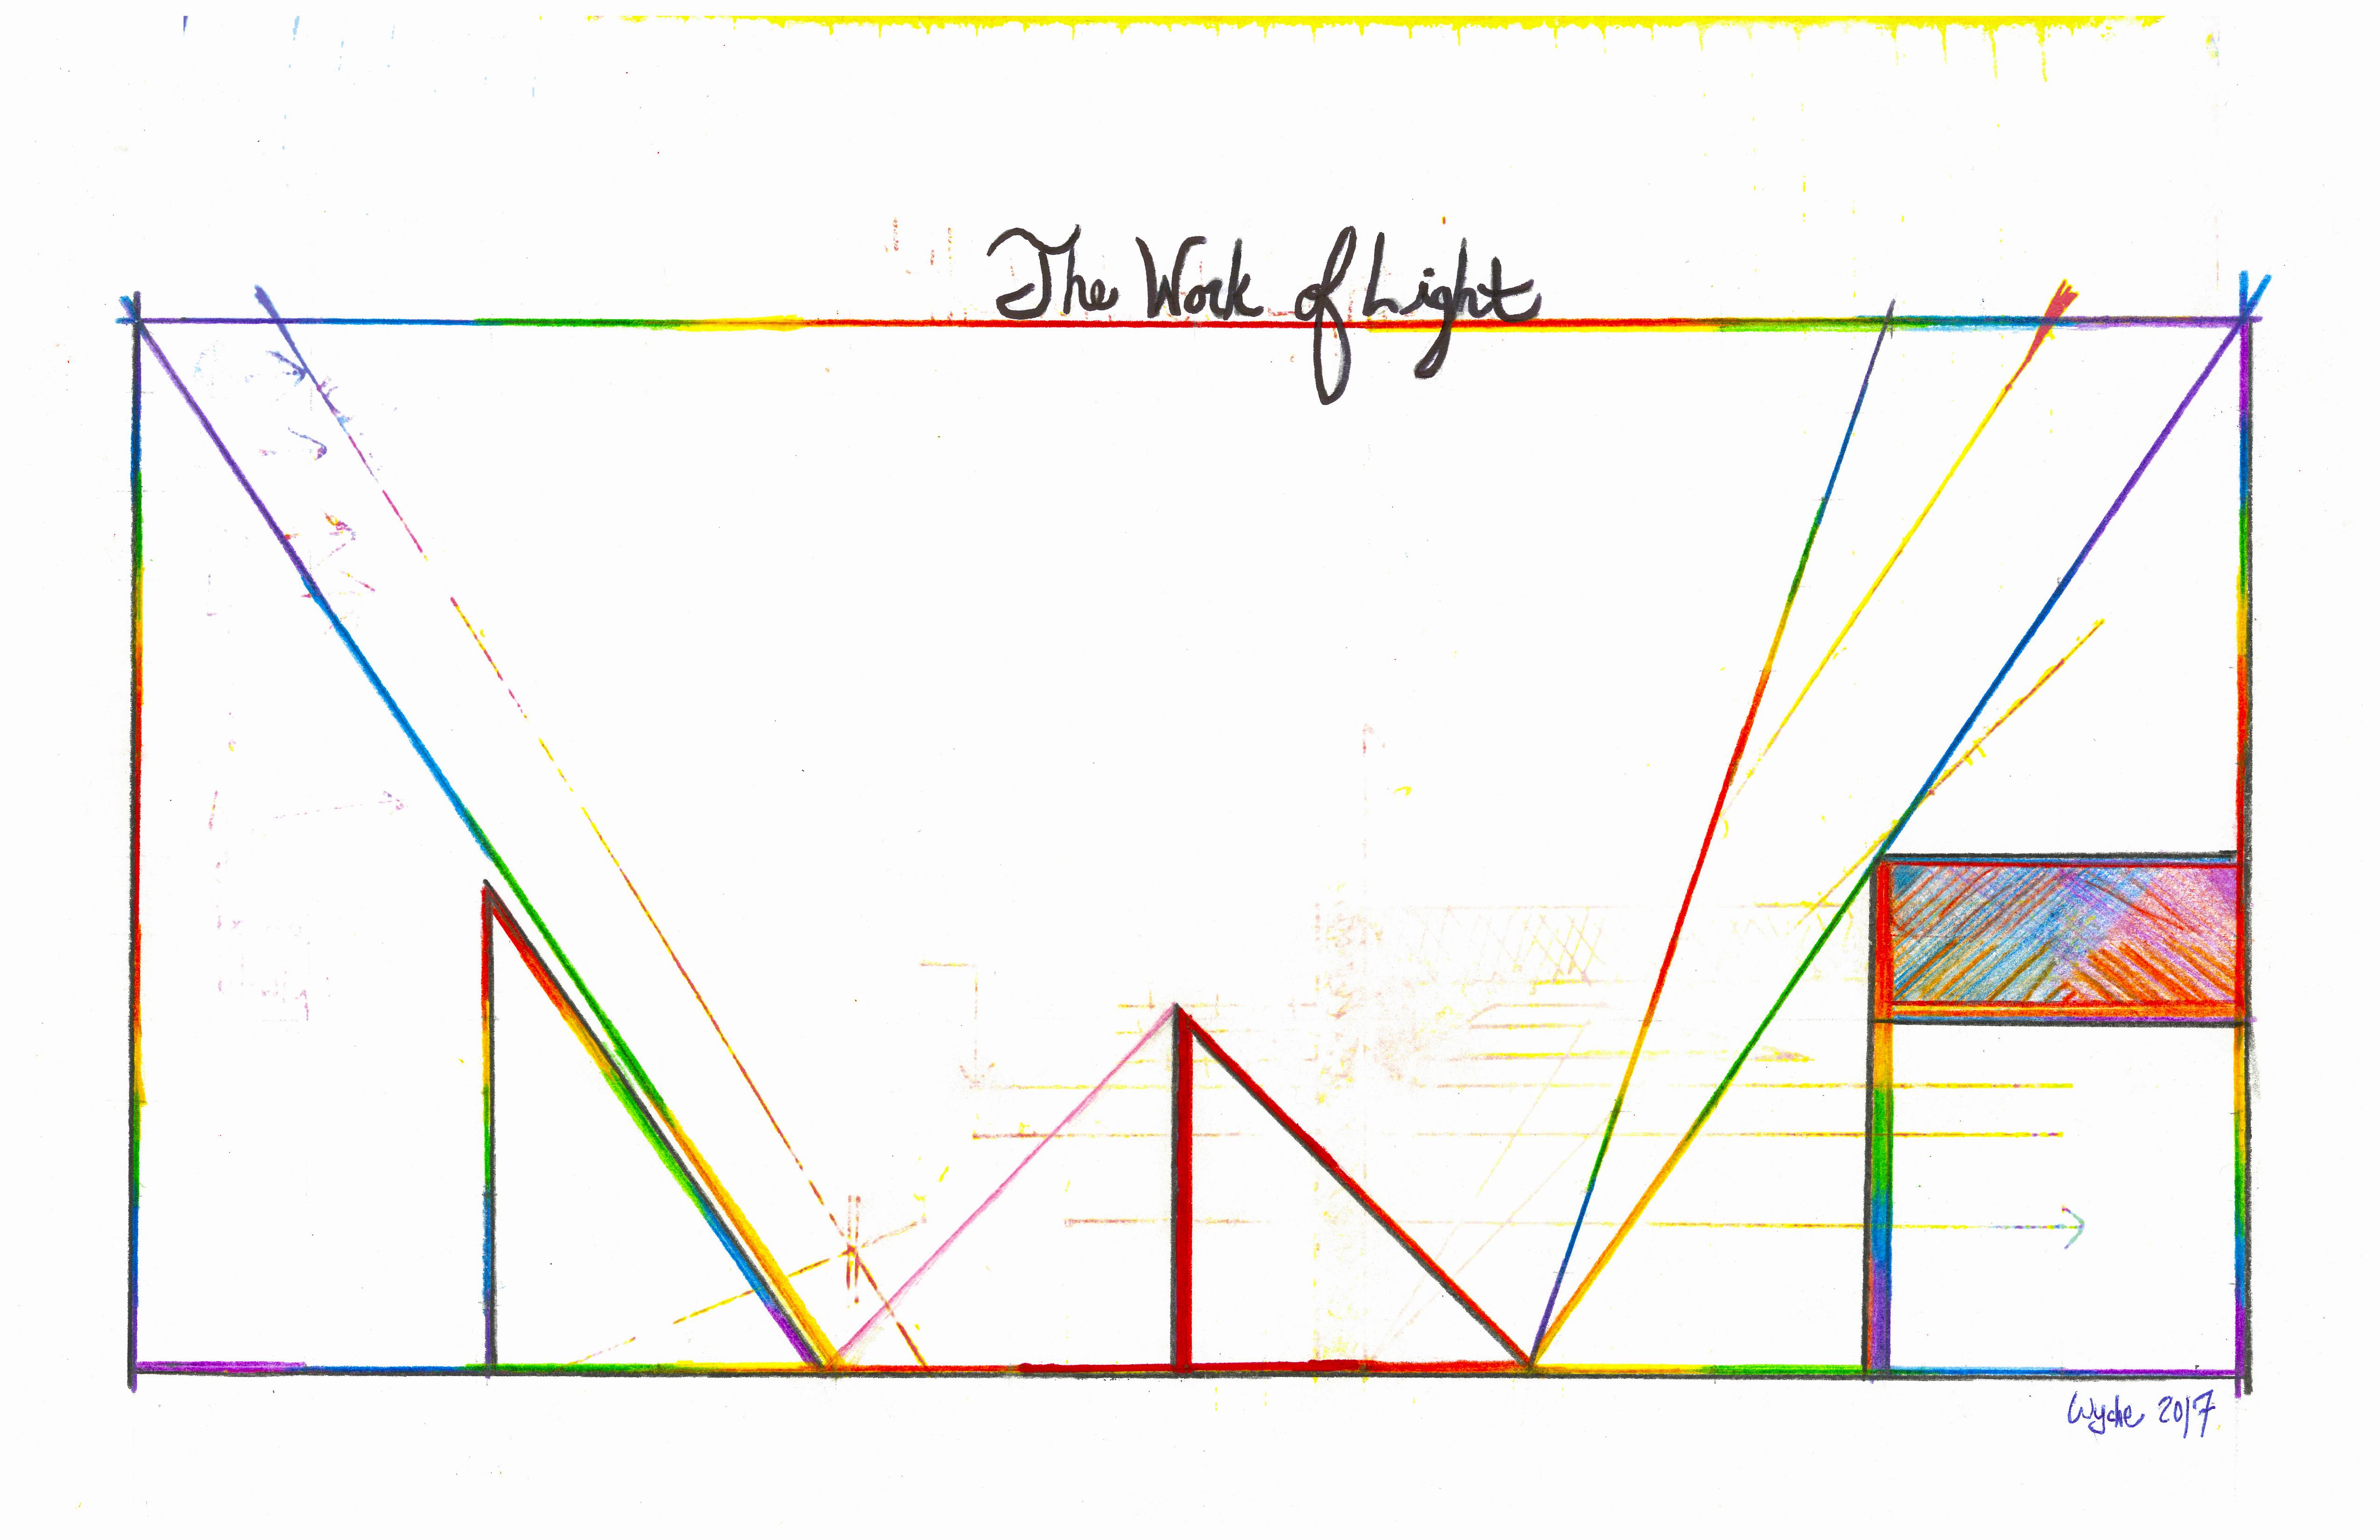 Rainbow-hued straight lines on a white page intersect, forming a rectangular frame and geometric shapes and arrows. Black, cursive text above reads "The Work of Light".